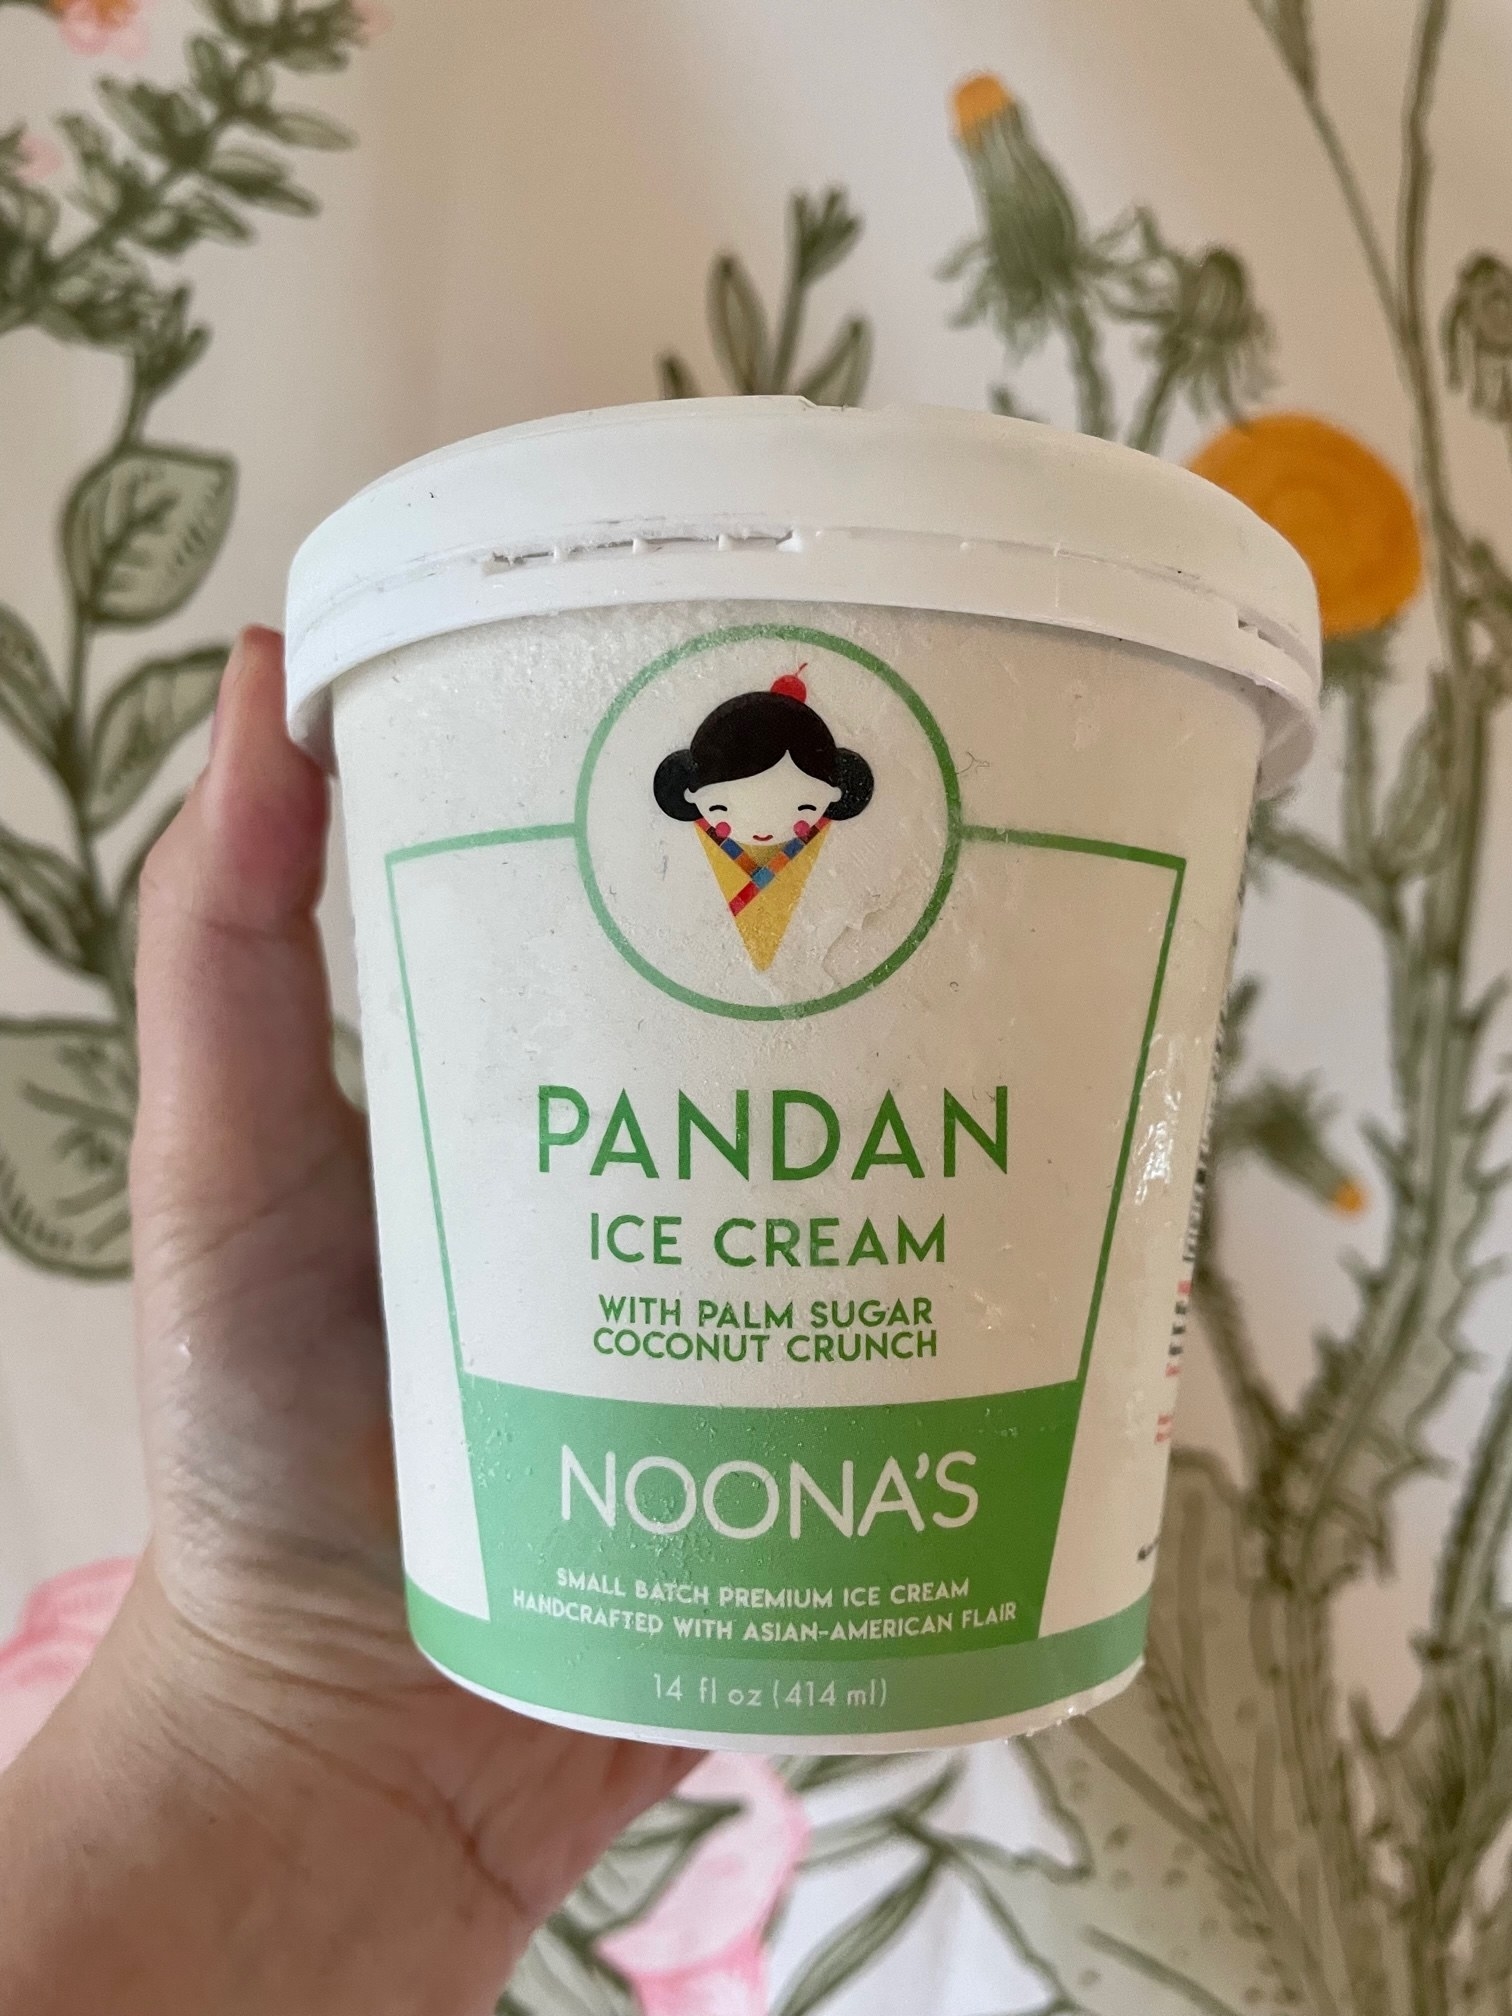 Writer holding up a carton of pandan ice cream with palm sugar coconut crunch